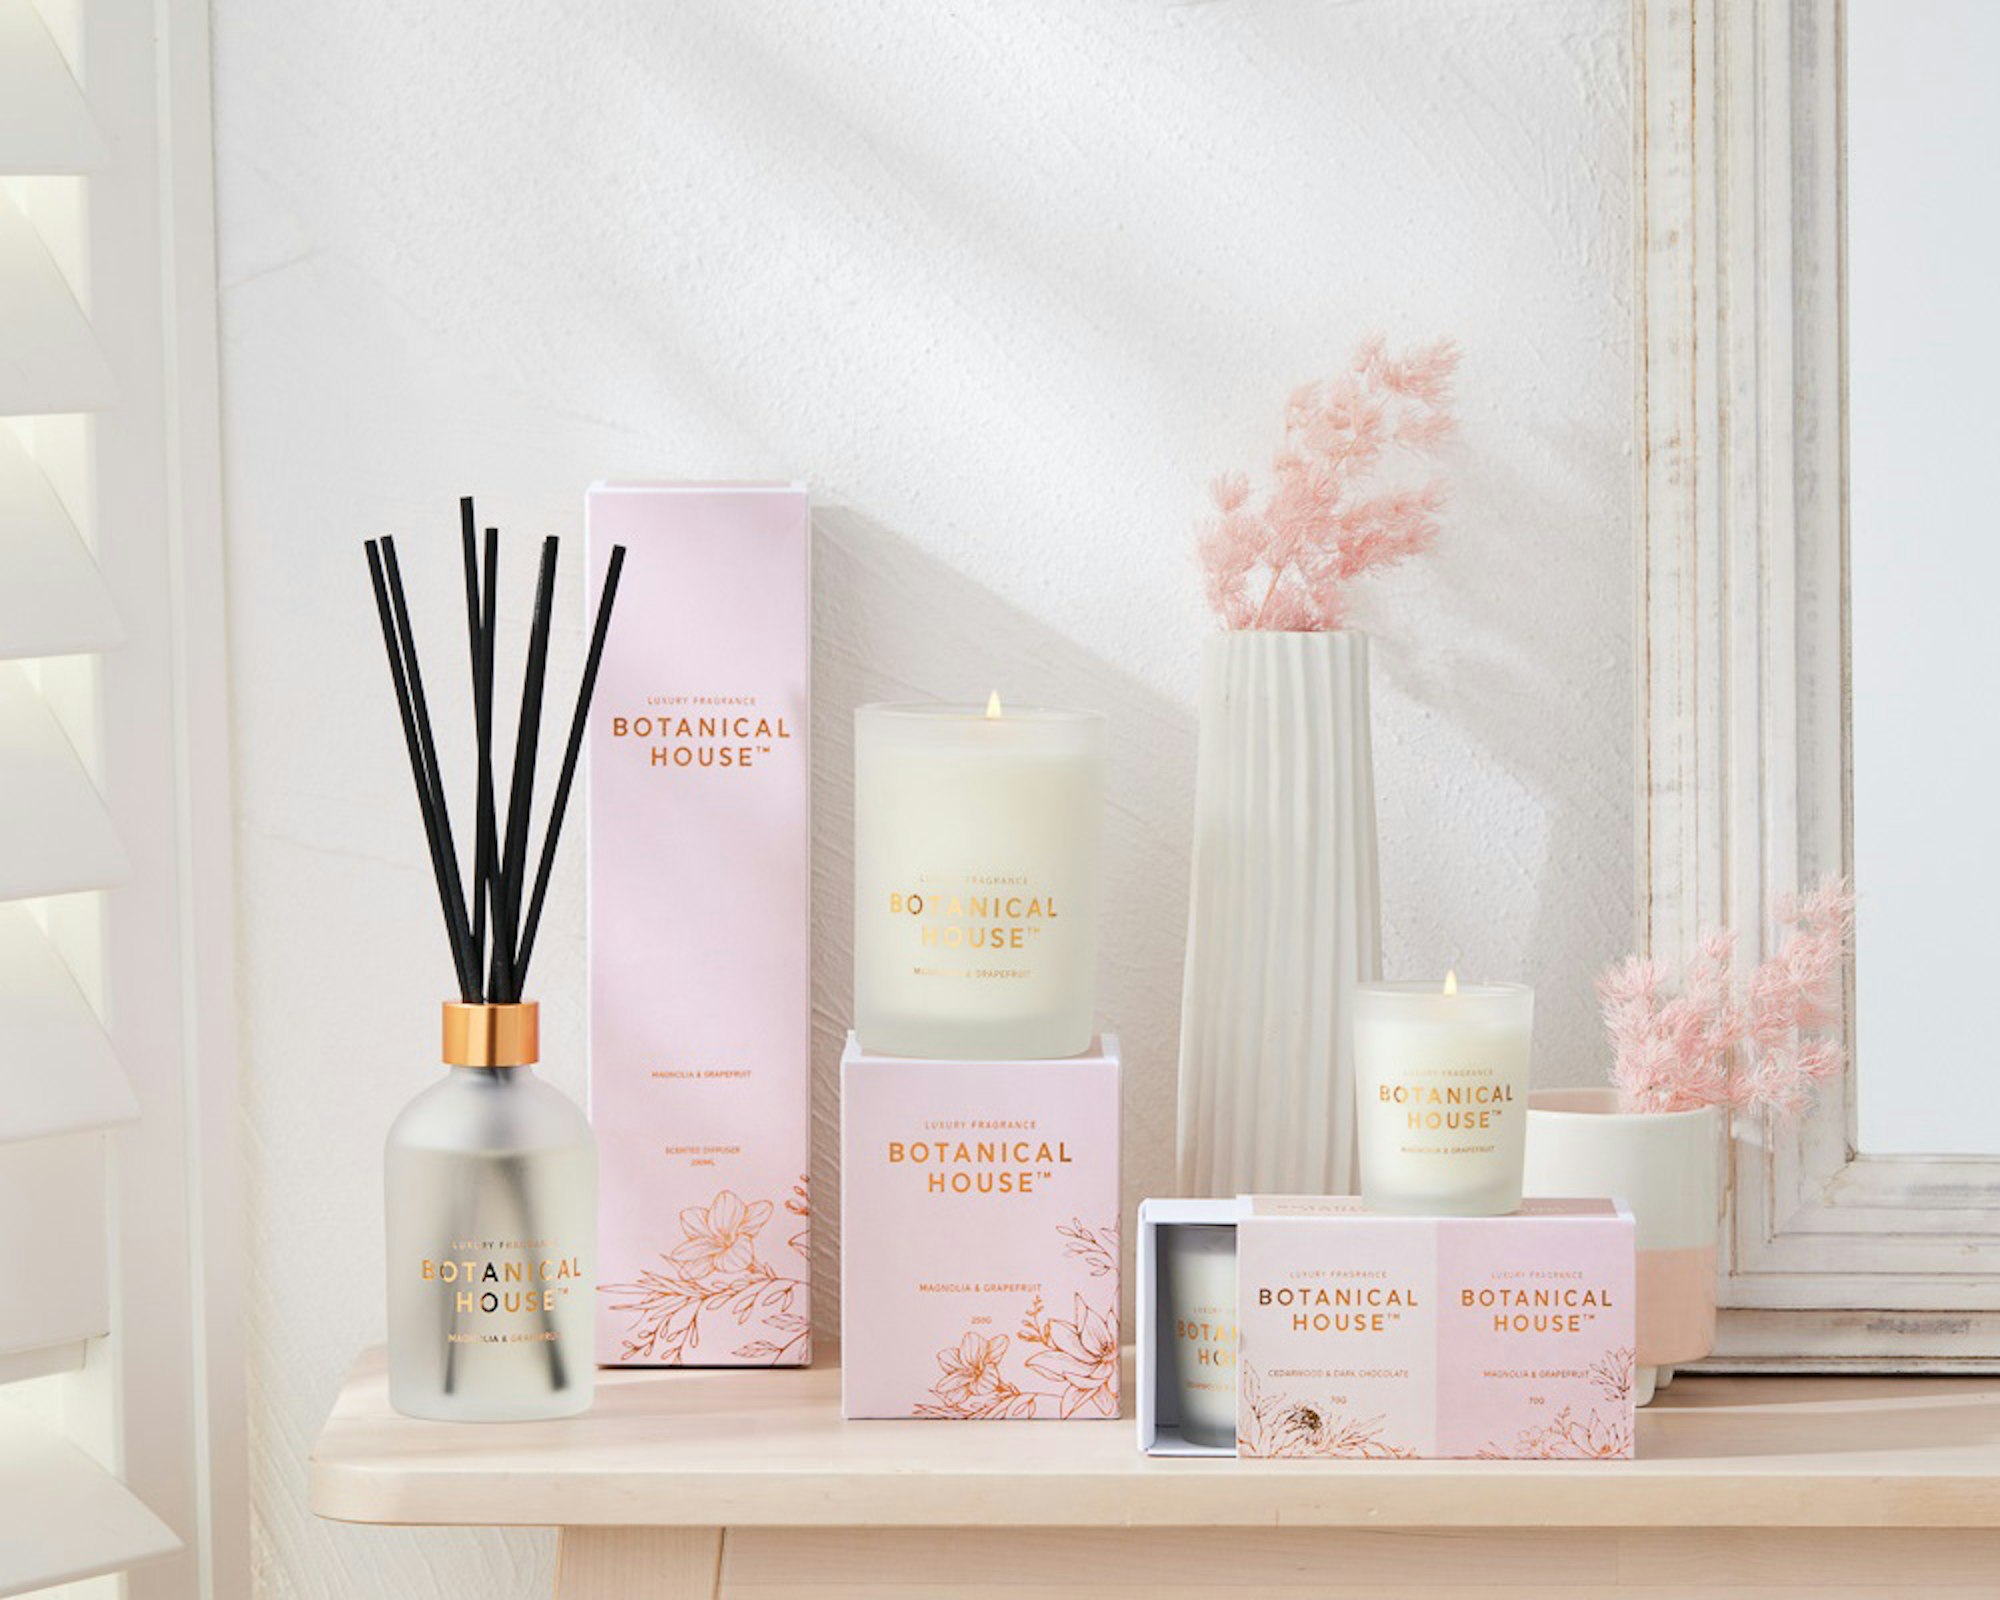 Stack of home fragrance. Scented candles, reed diffusers. Botanical House.